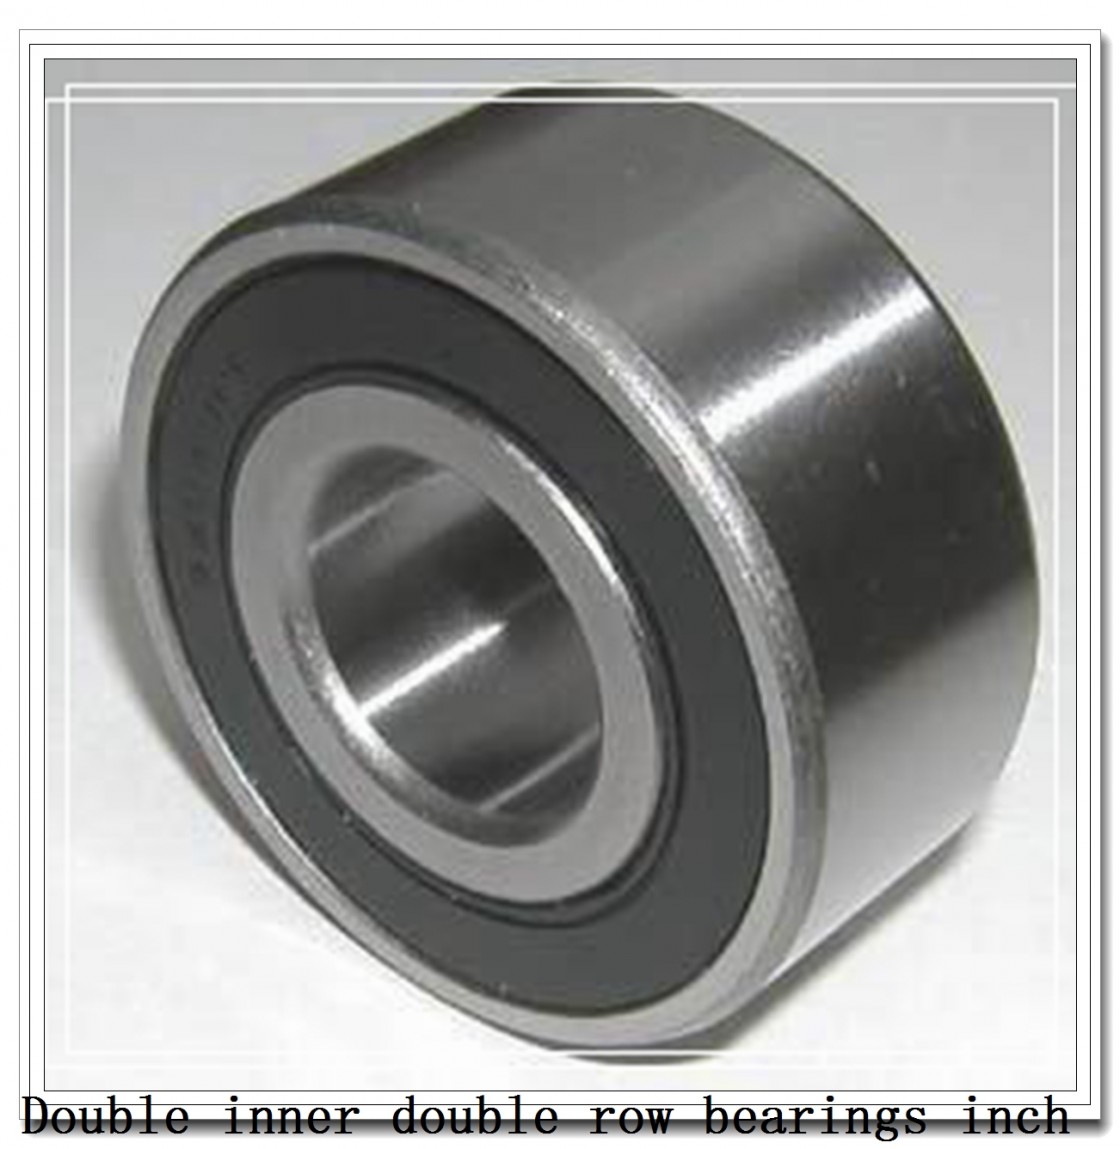 L357049NW/L357010D Double inner double row bearings inch